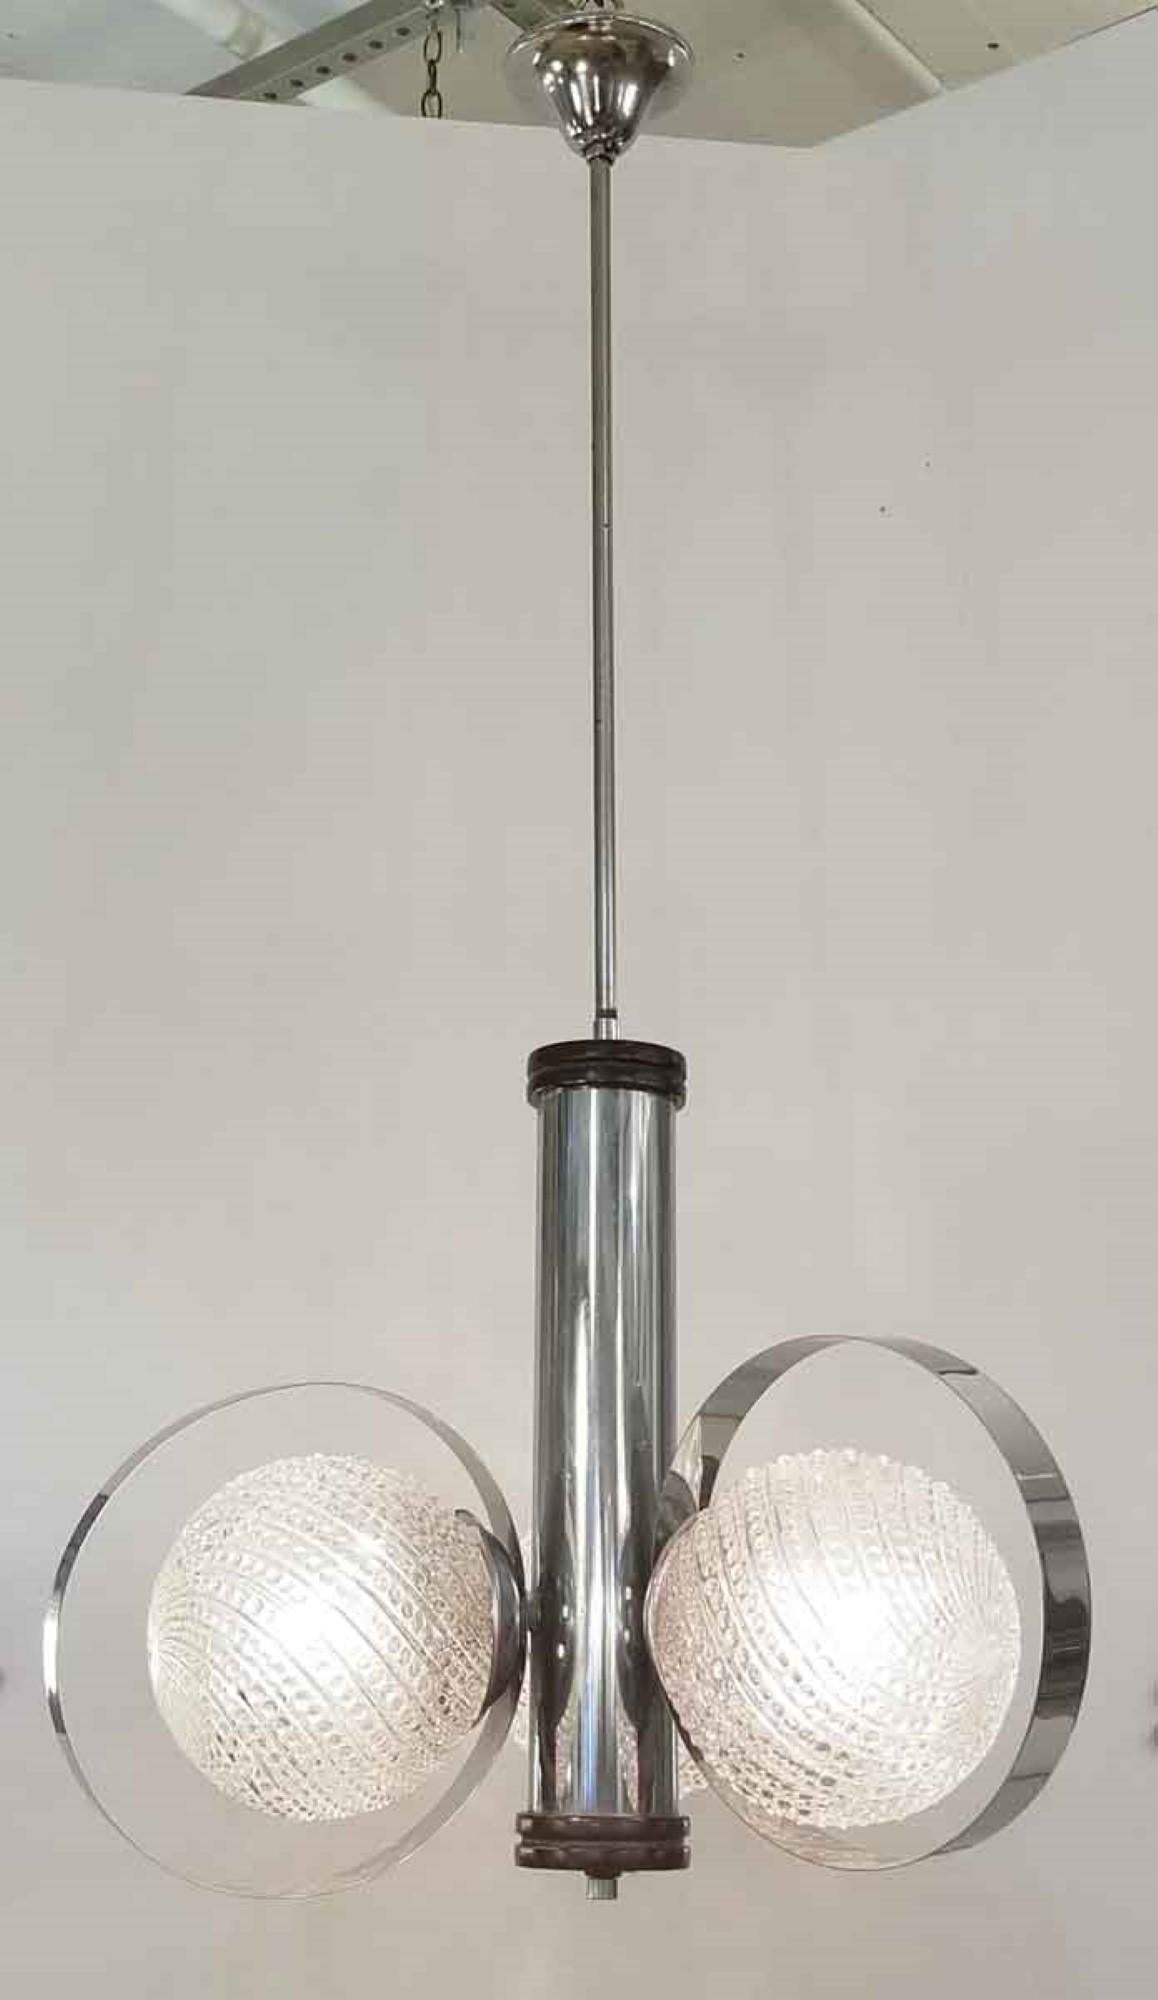 This is a 1930s French deco chandelier consisting of three textured beaded sphere globes each encircled with a chrome strip. The main stem is chrome with wood at the top and bottom. Imported from Belgium. Price includes restoration. Please allow 1-2